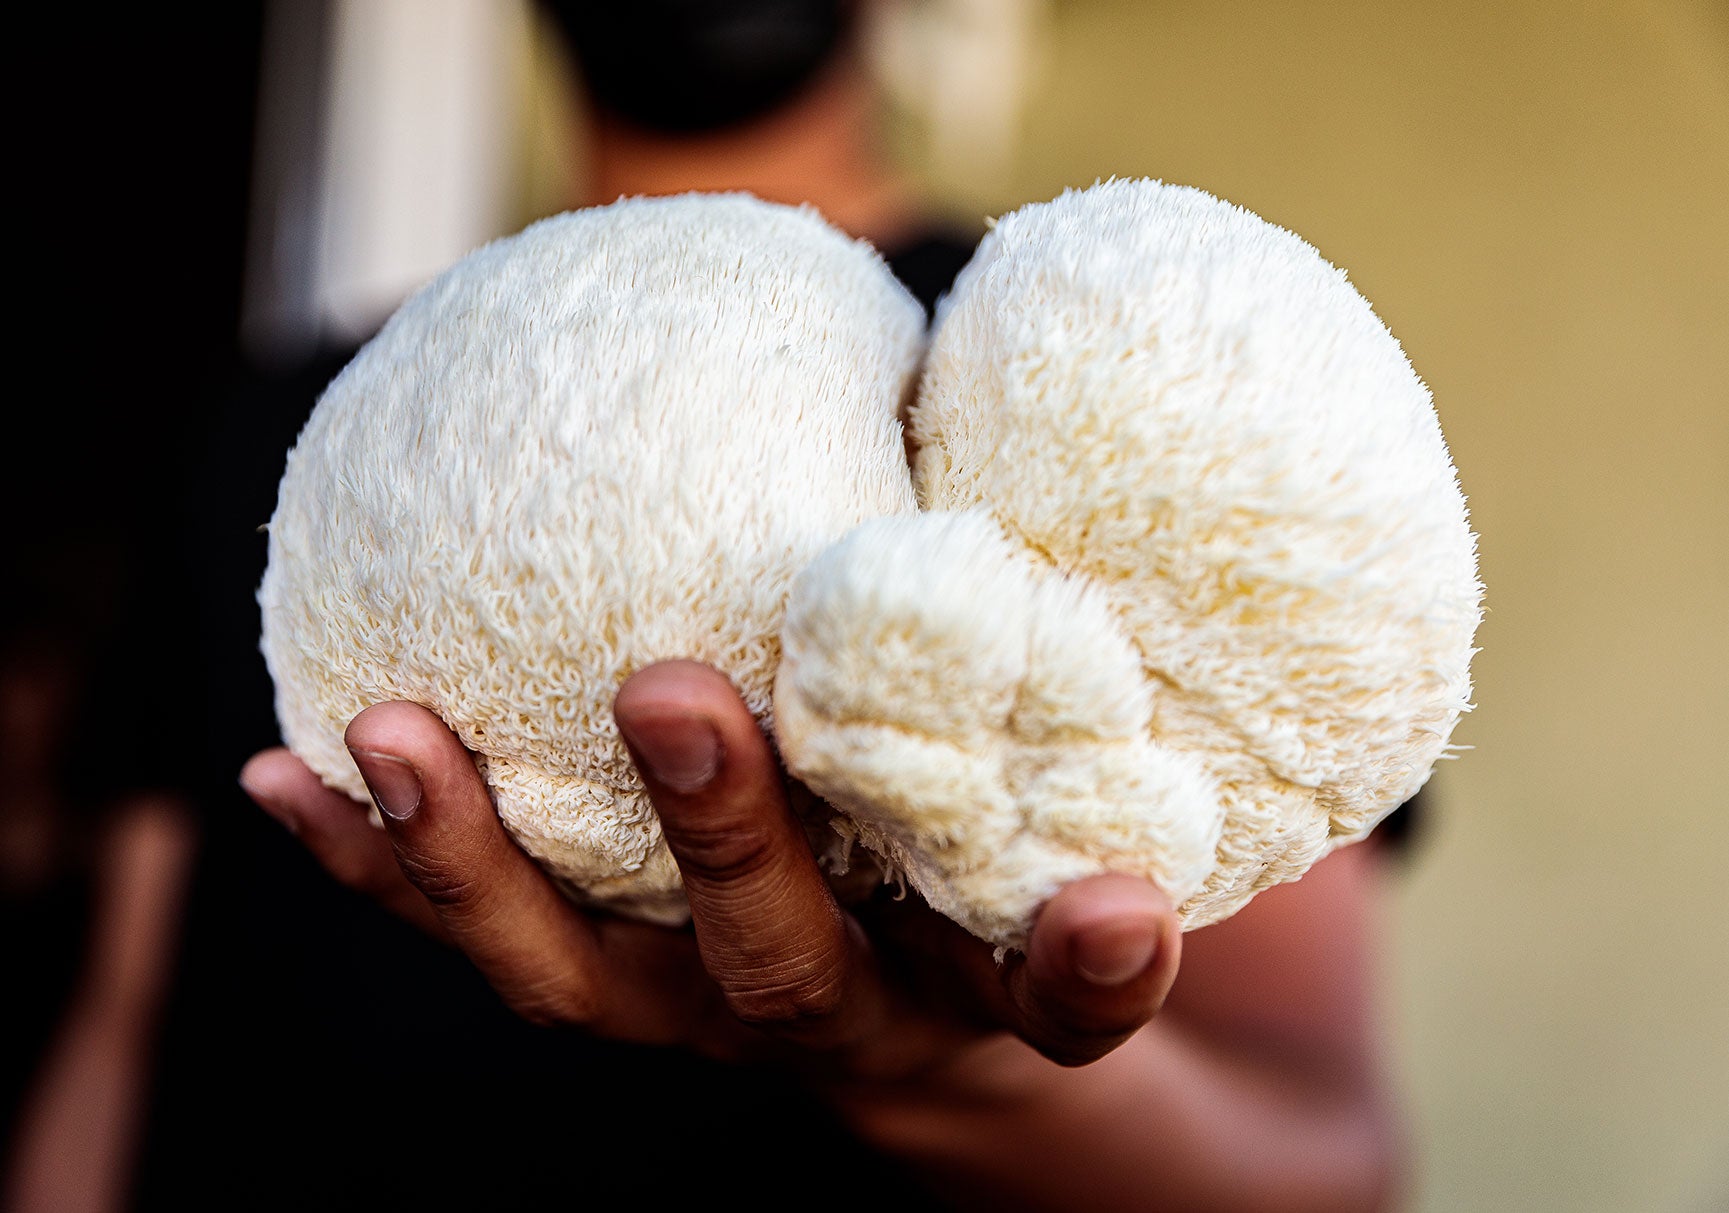 A customer holds out some lion's mane mushrooms purchased from Long Beach Mushrooms